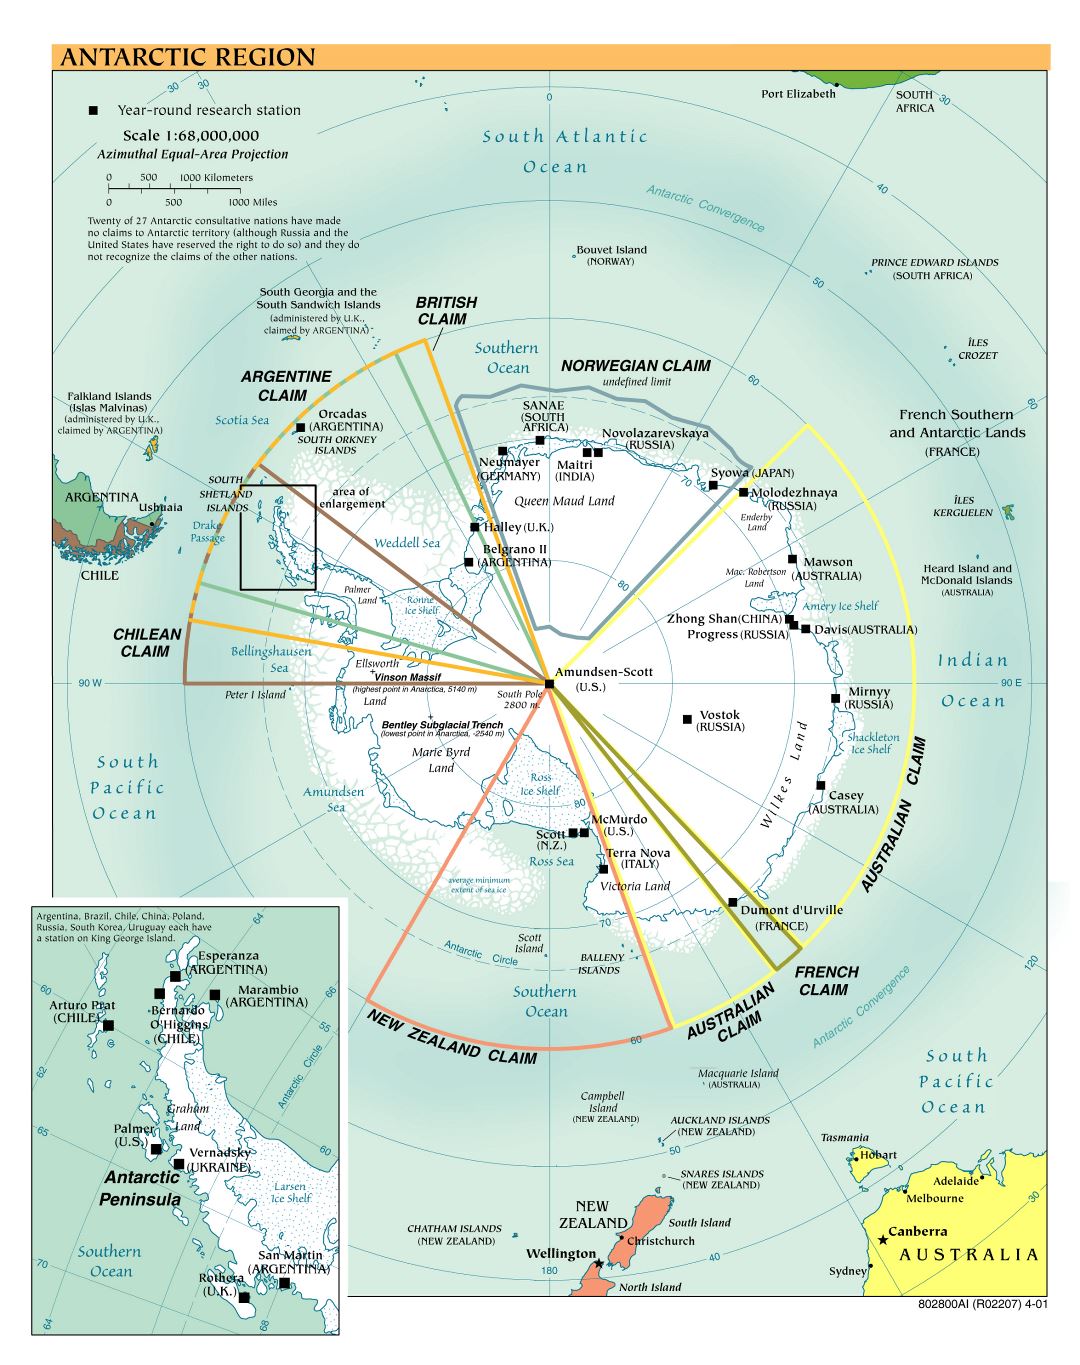 Large scale political map of Antarctic Region - 2001